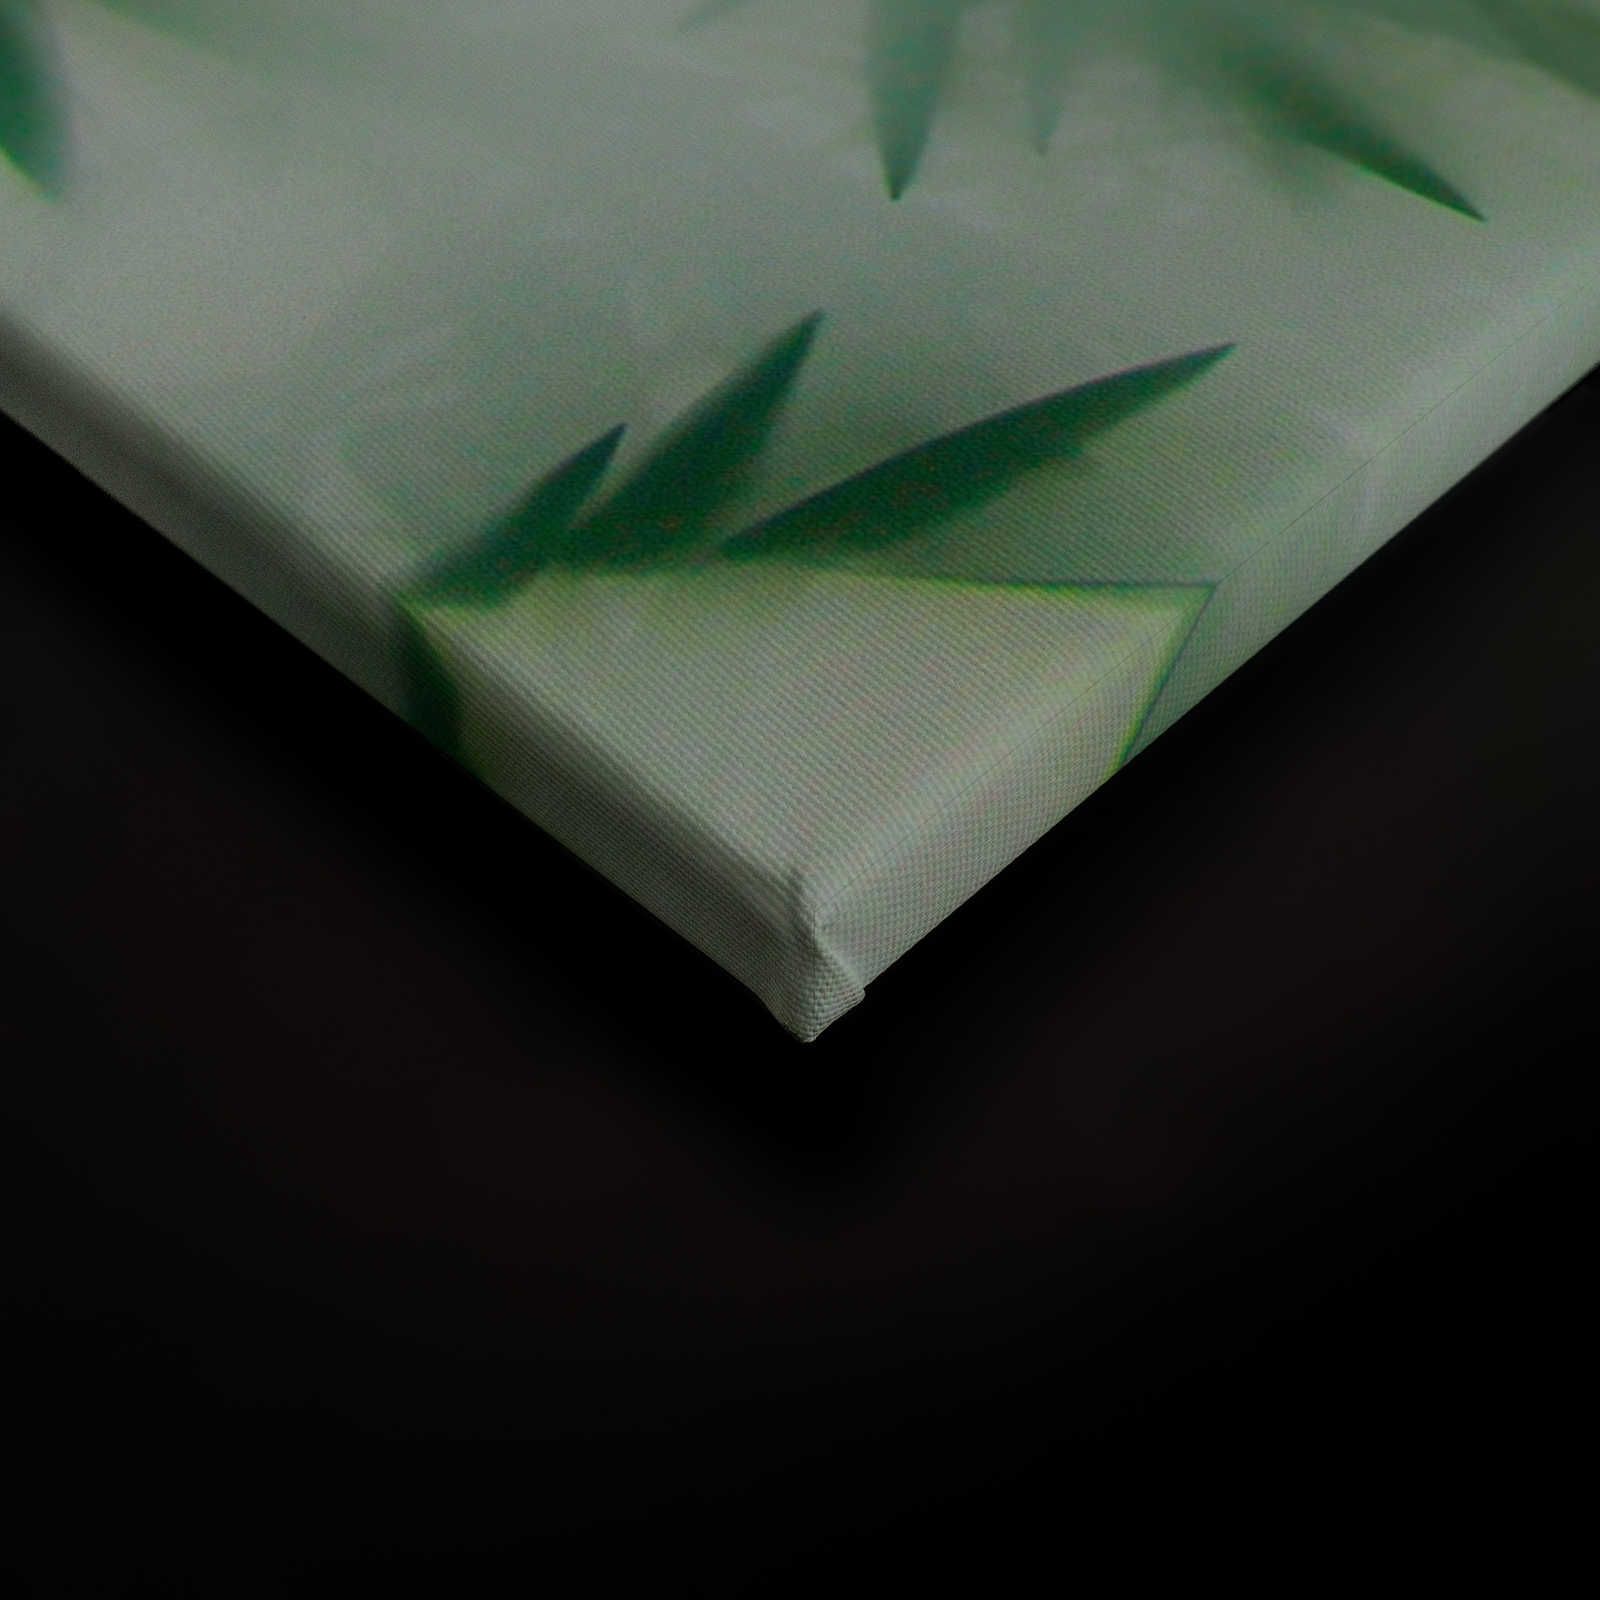             Panda Paradise 1 - Bamboo Canvas painting Green Leaves in the Mist - 0.90 m x 0.60 m
        